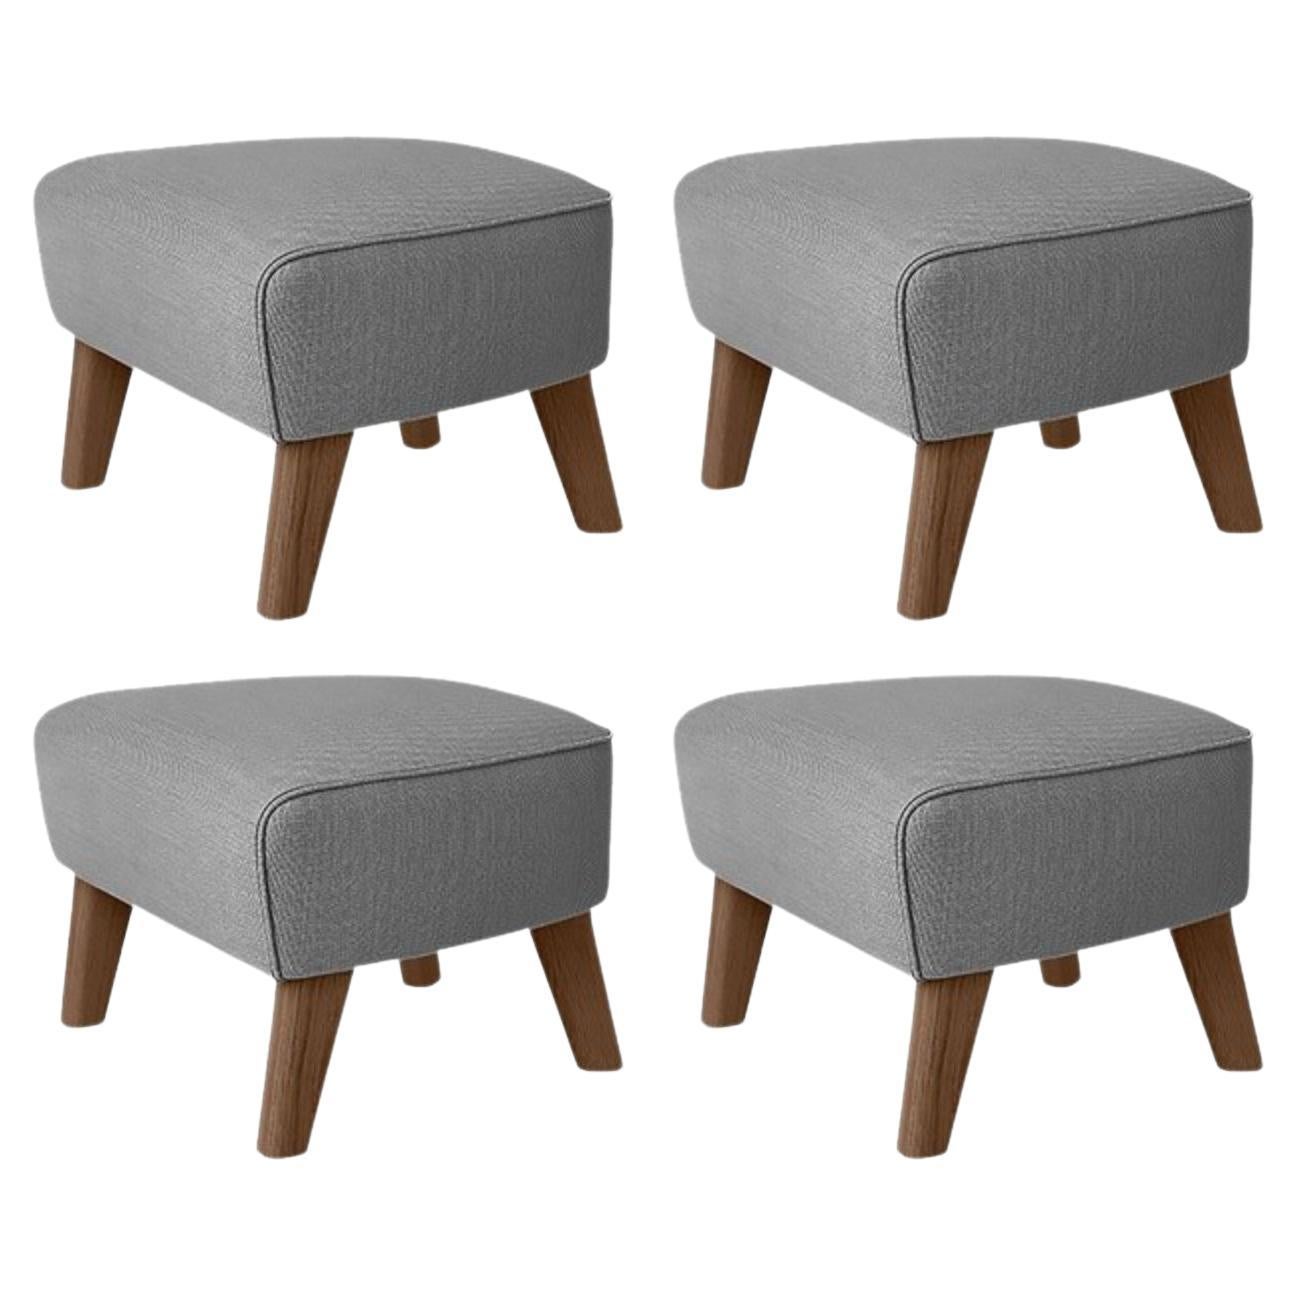 Set of 4 Grey and Smoked Oak Sahco Zero Footstool by Lassen For Sale